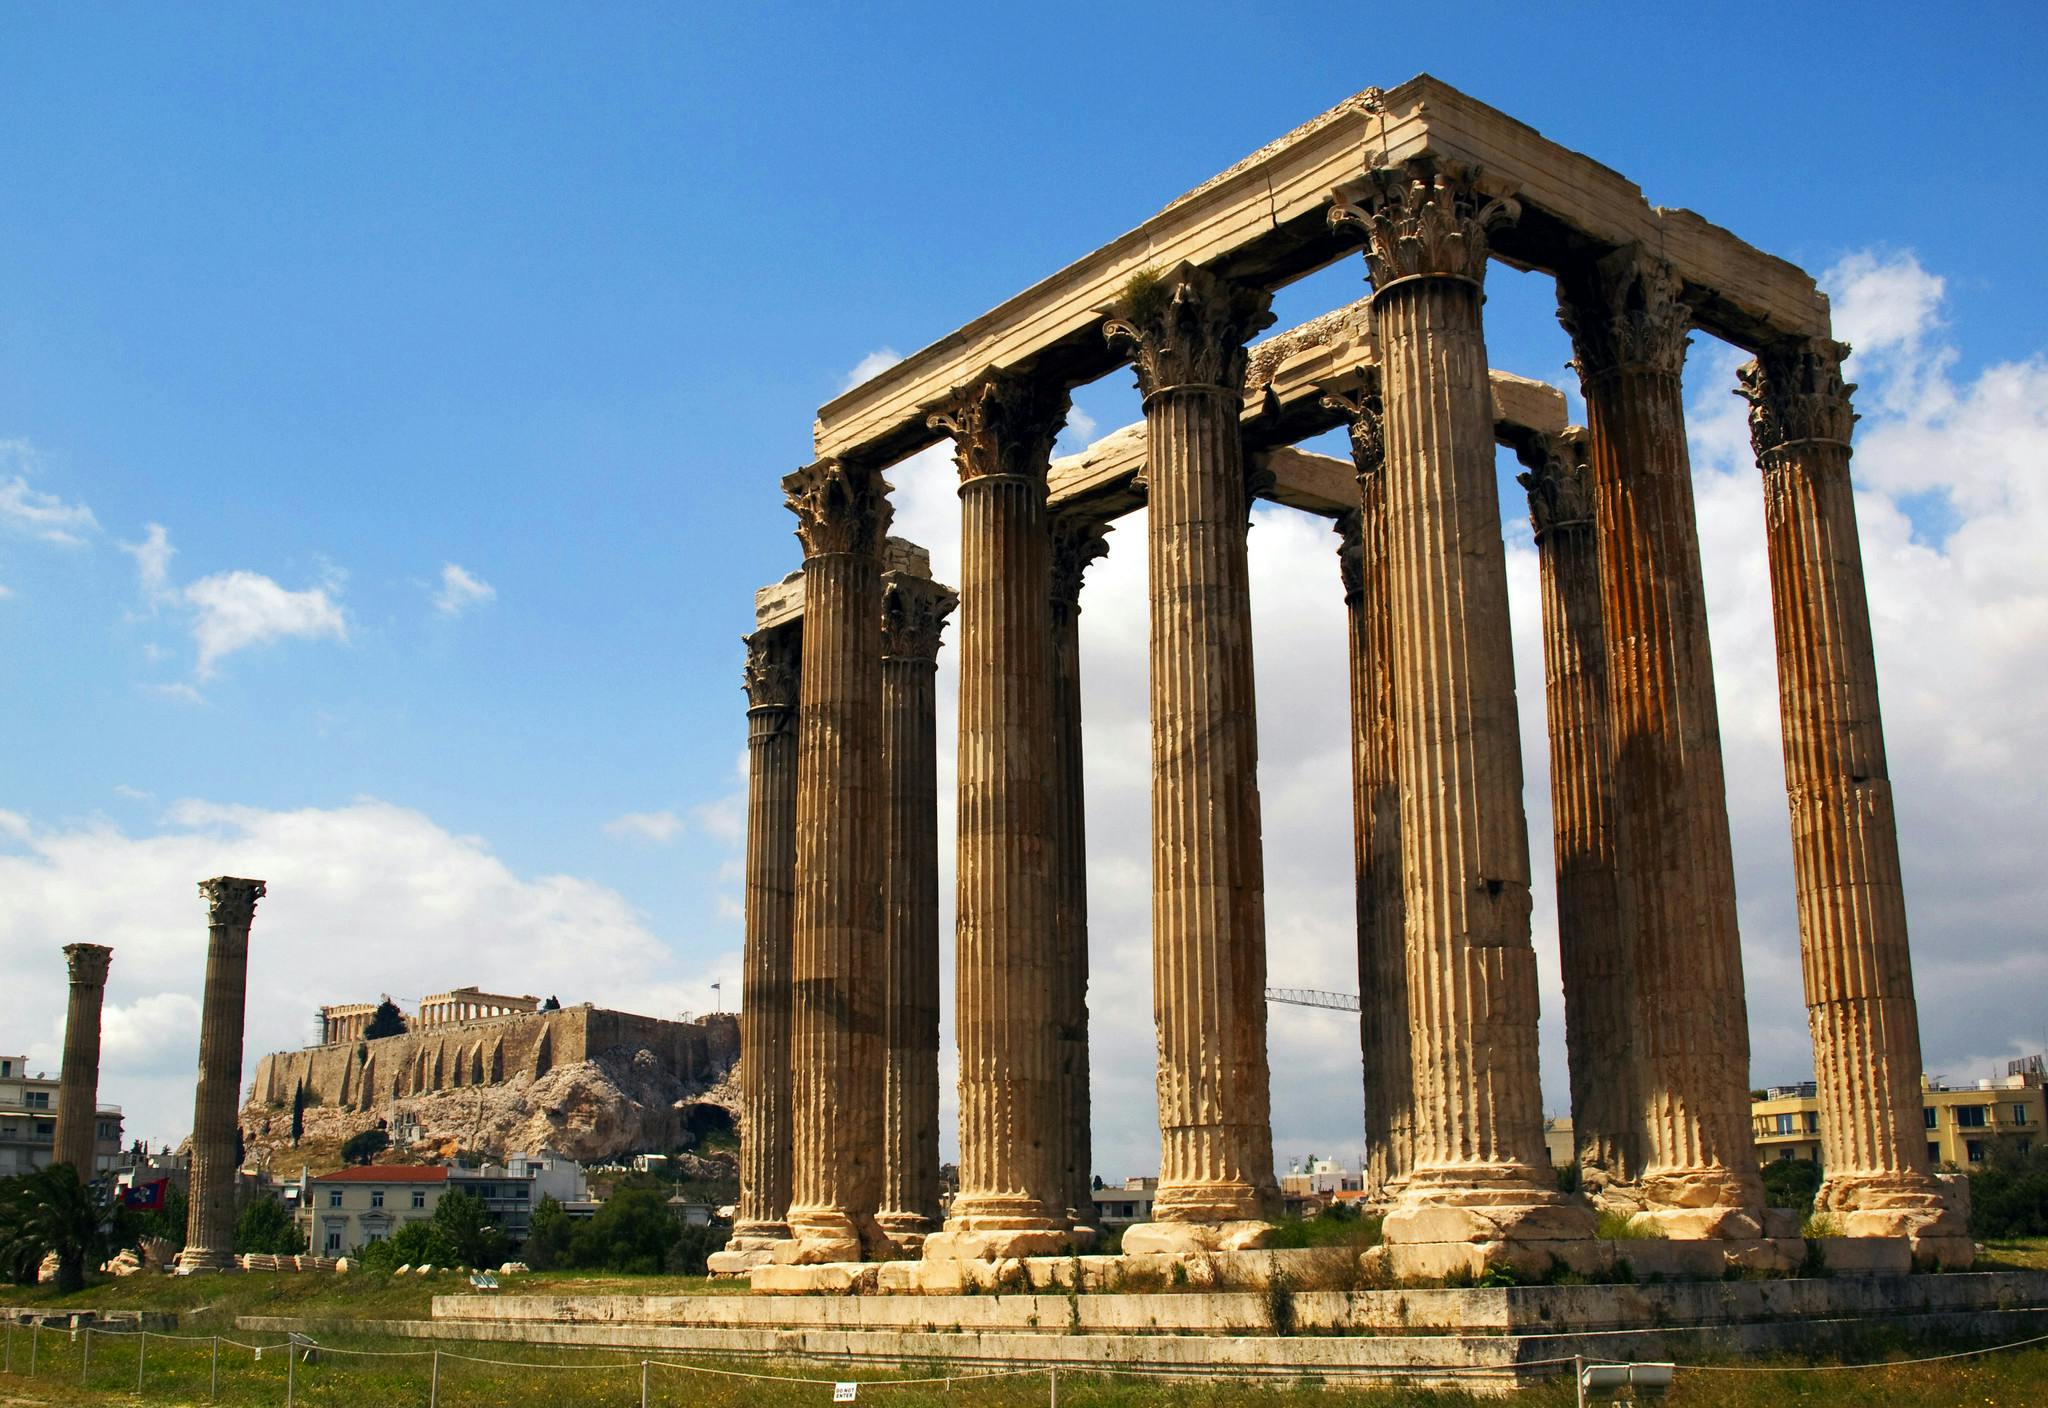 Temple of Olympian Zeus (by Kevin Poh on Flickr)